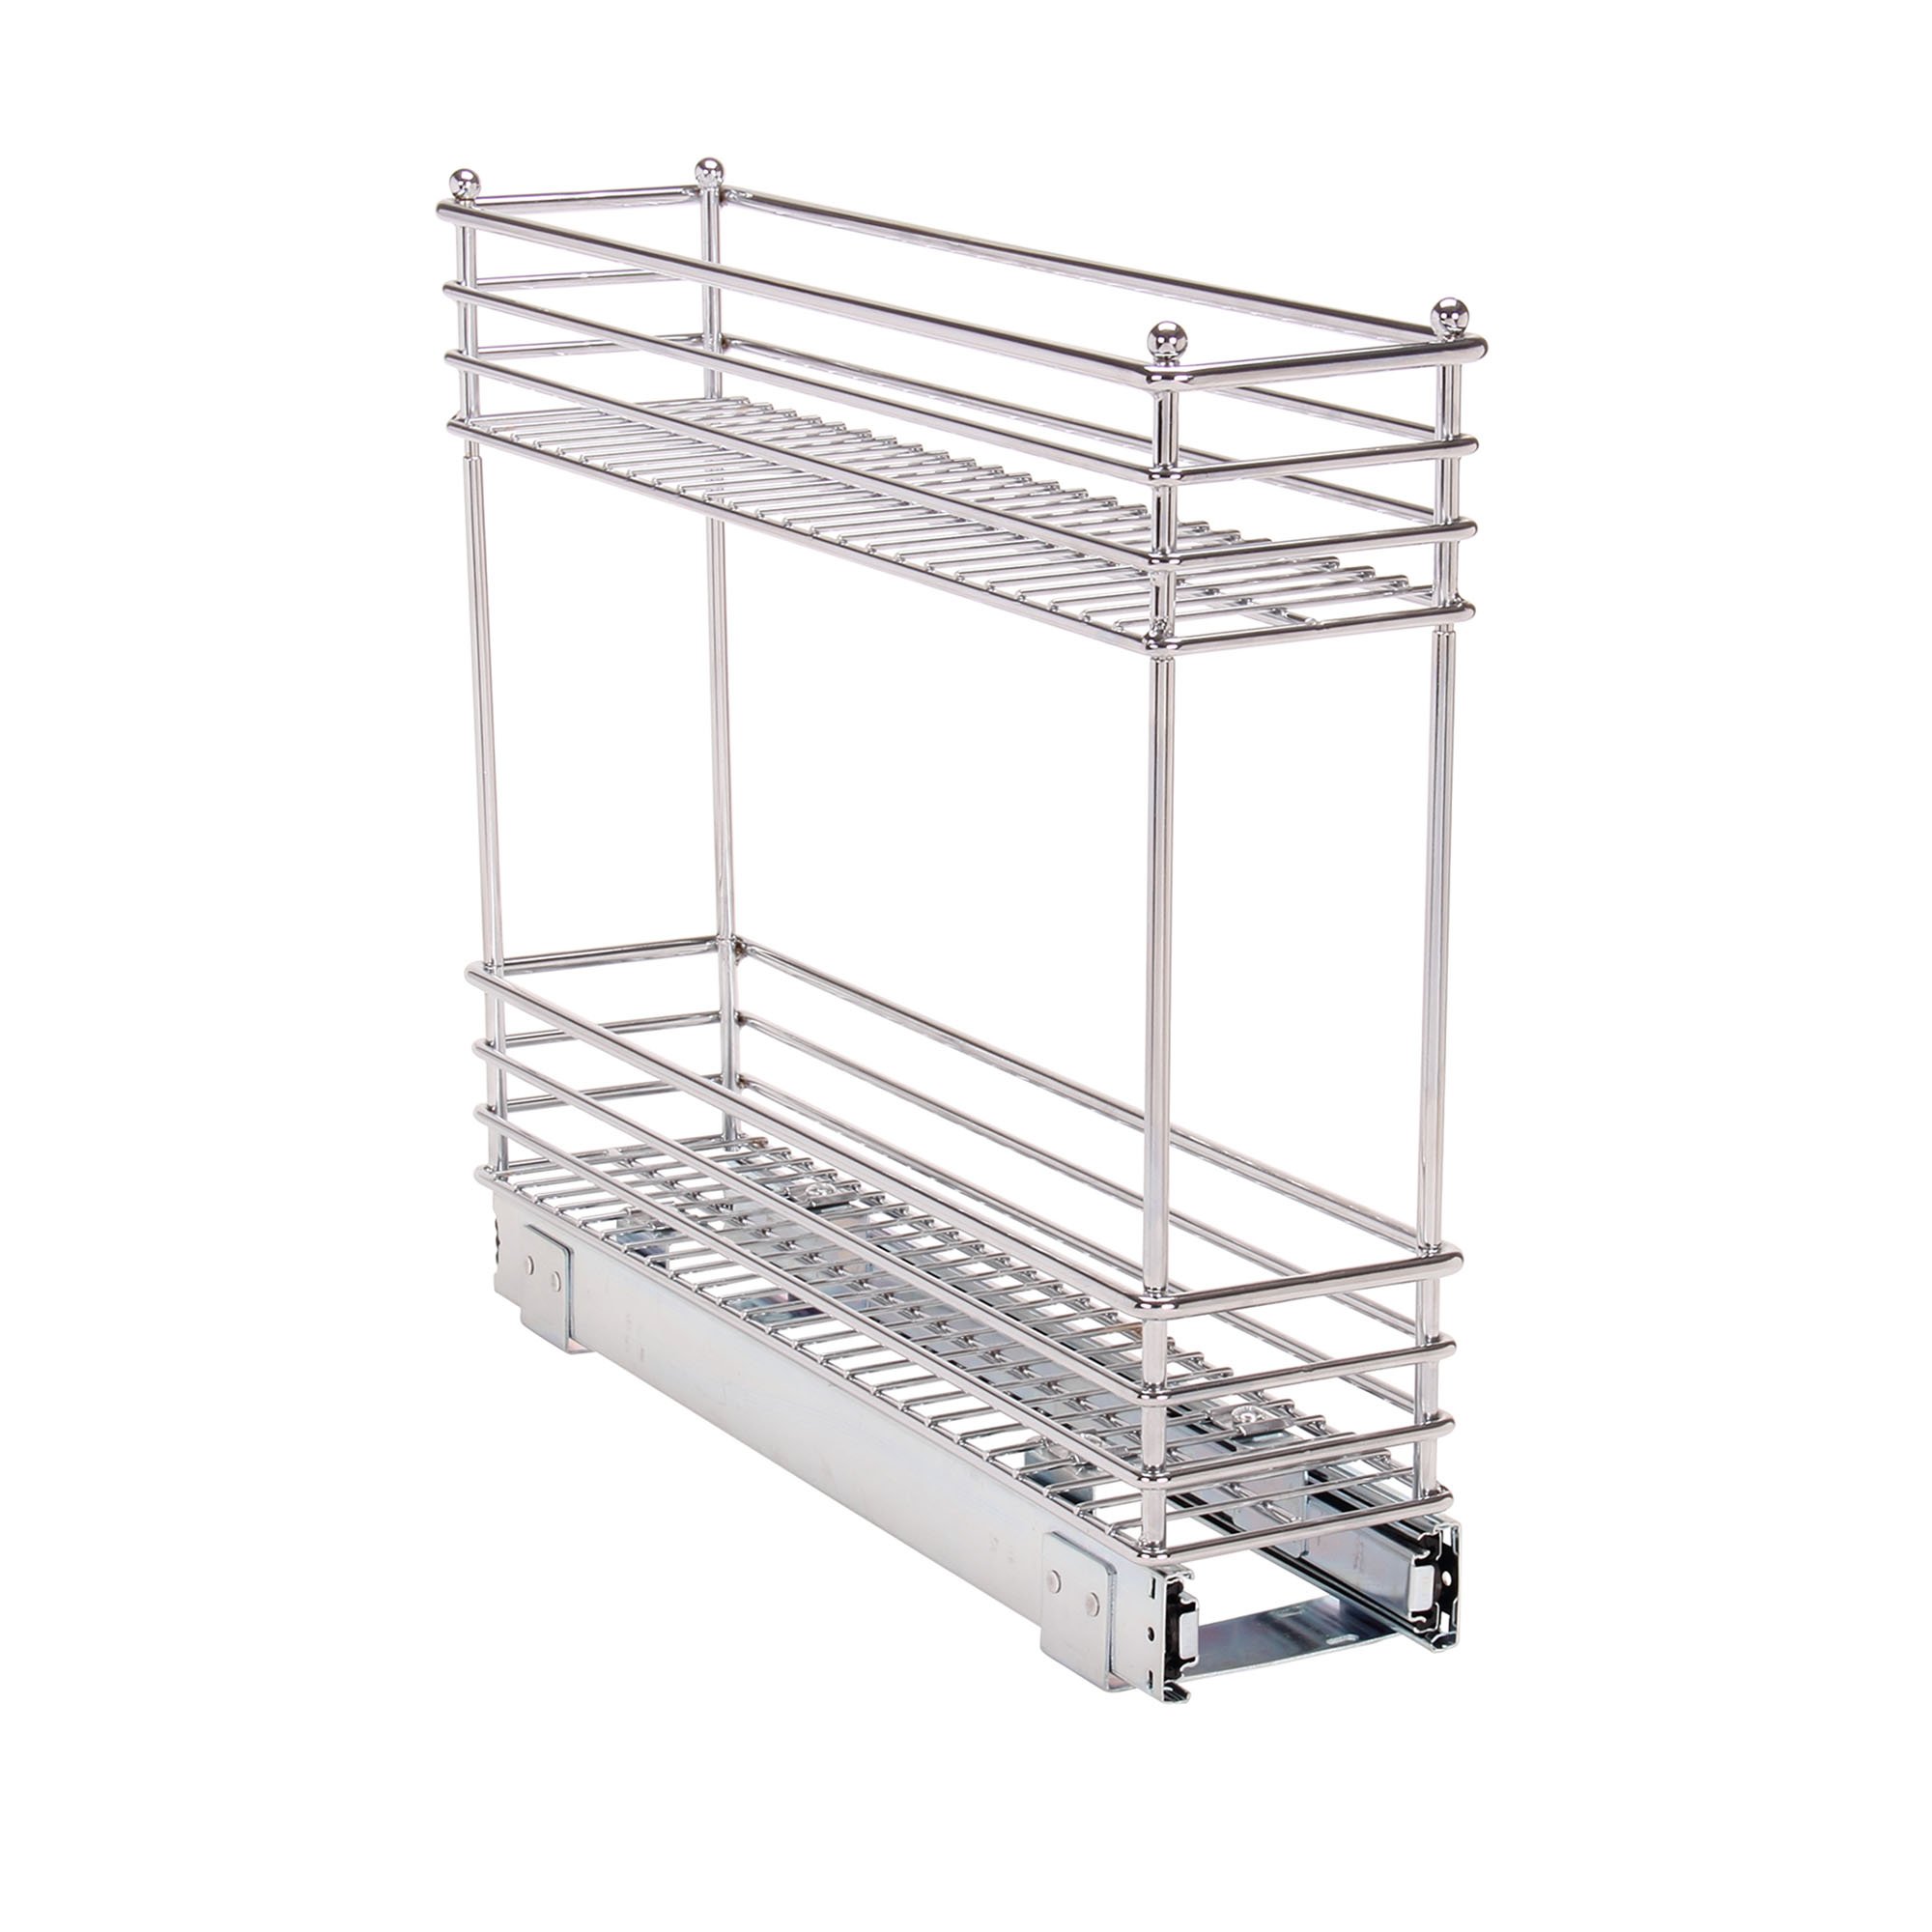 Household Essentials Narrow Sliding Cabinet Organizers (7" and 5"), Two Tier Chrome Organizers, Great for Slim Kitchen and Bathroom Cabinets